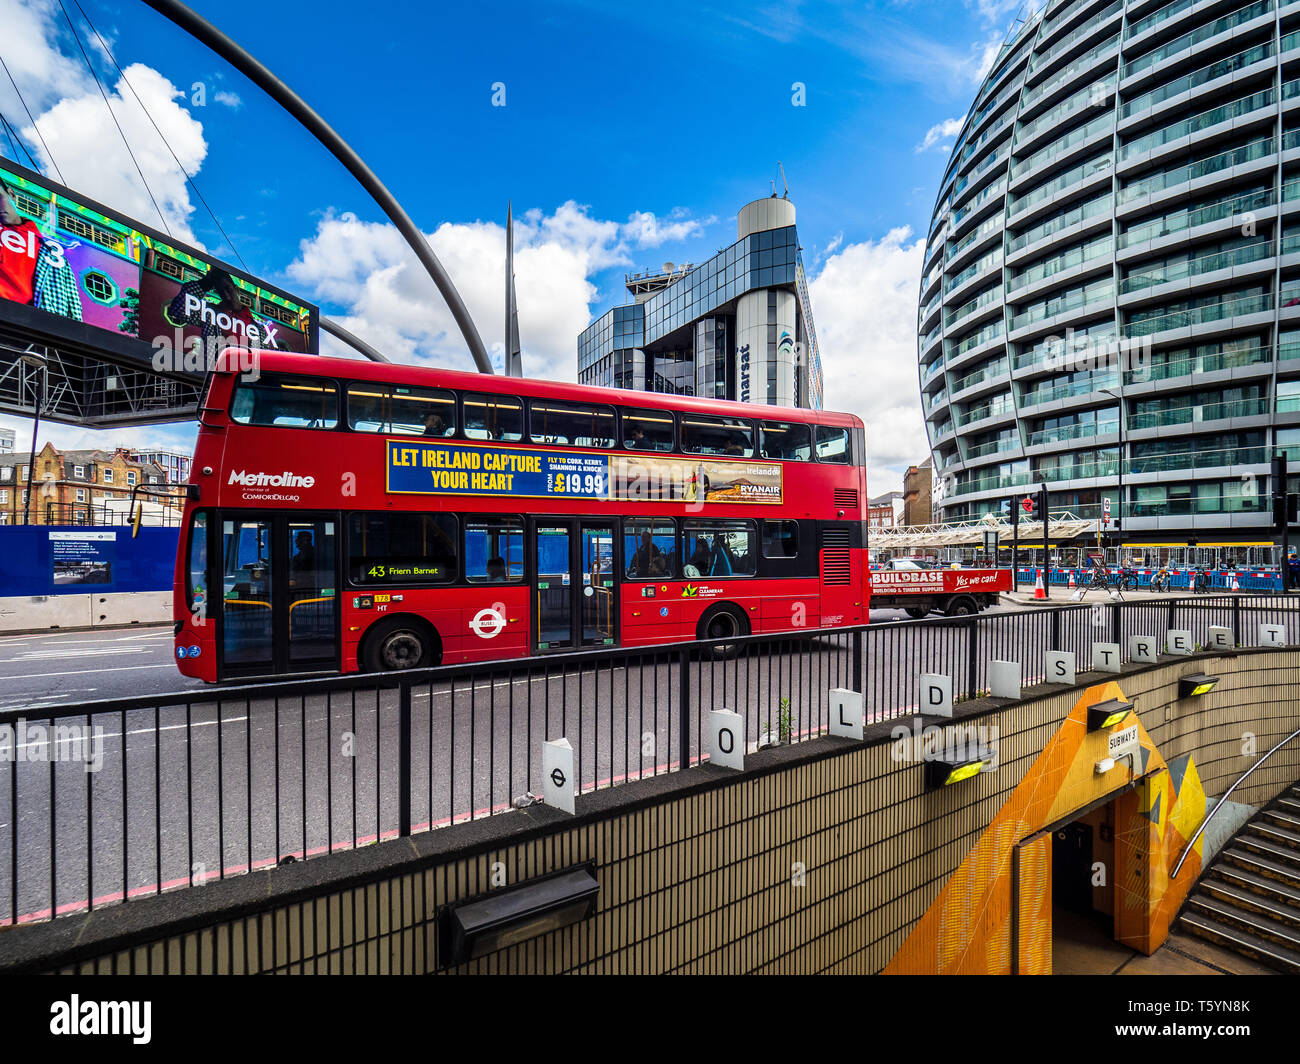 Old Street Roundabout London also known Silicon Roundabout because of the concentration of high technology and web industries in the area. Stock Photo